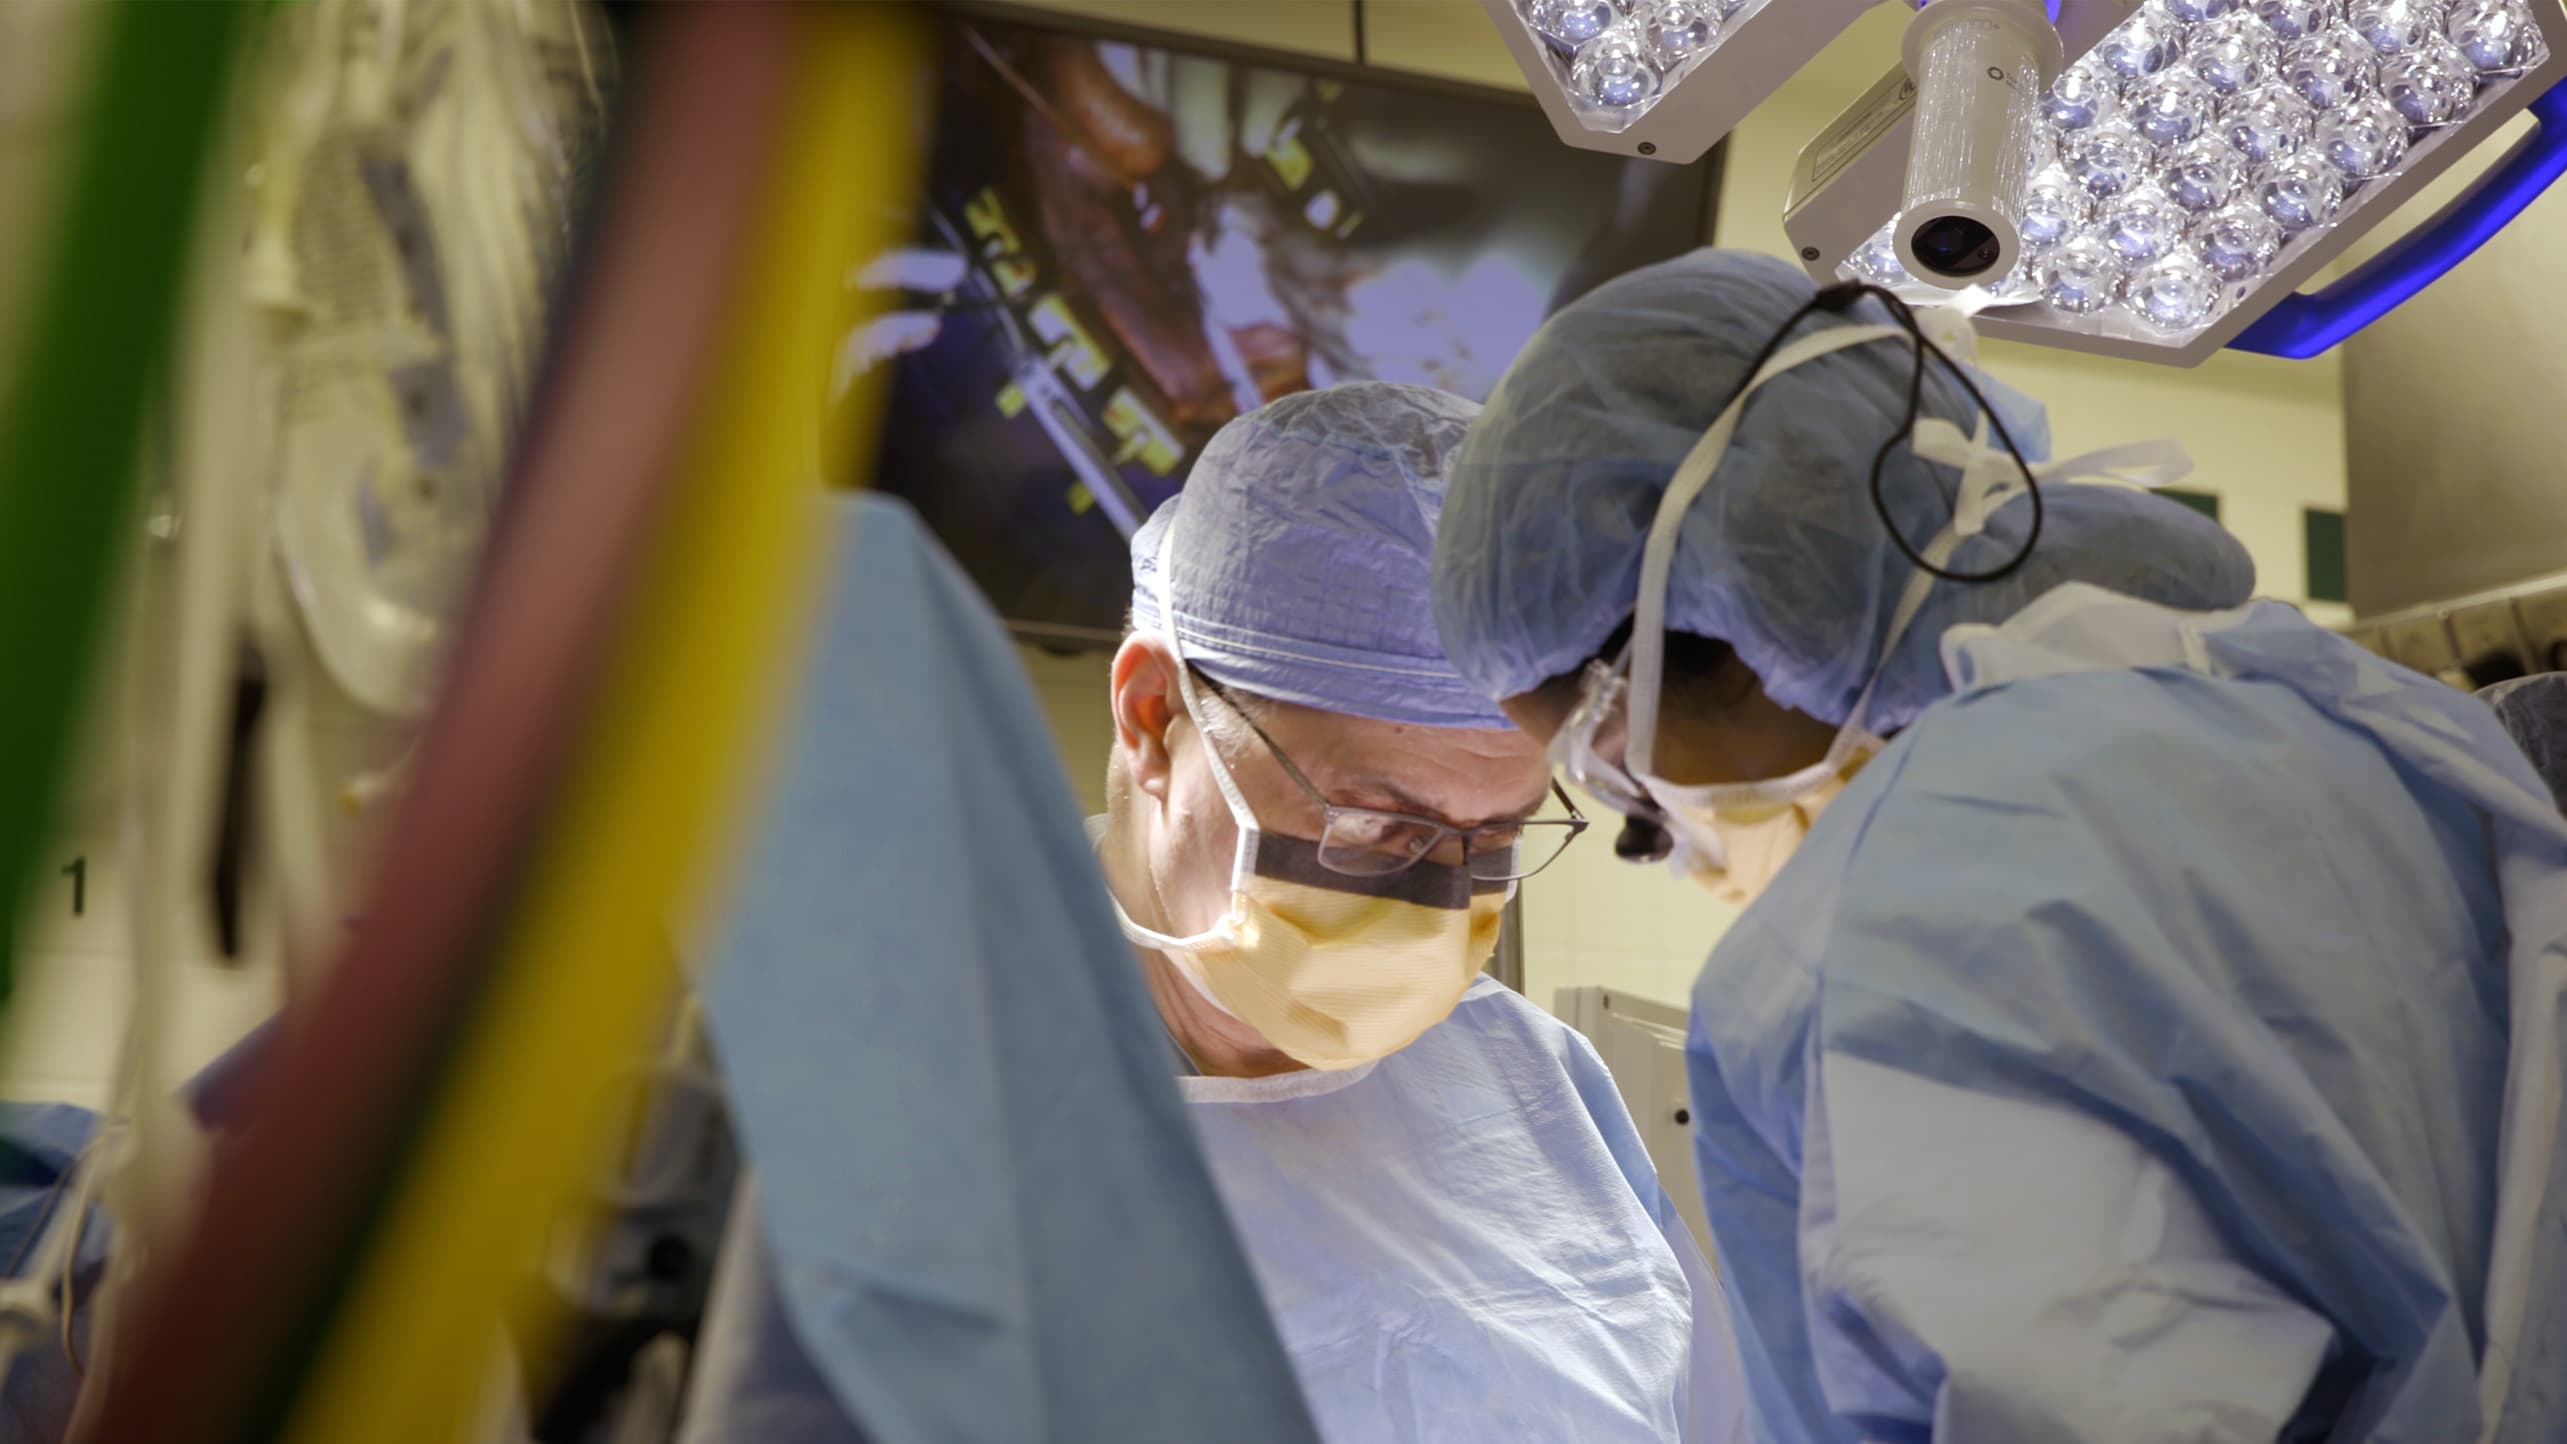 Doctors perform open heart surgery, possibly repair a ruptured aortic aneurysm